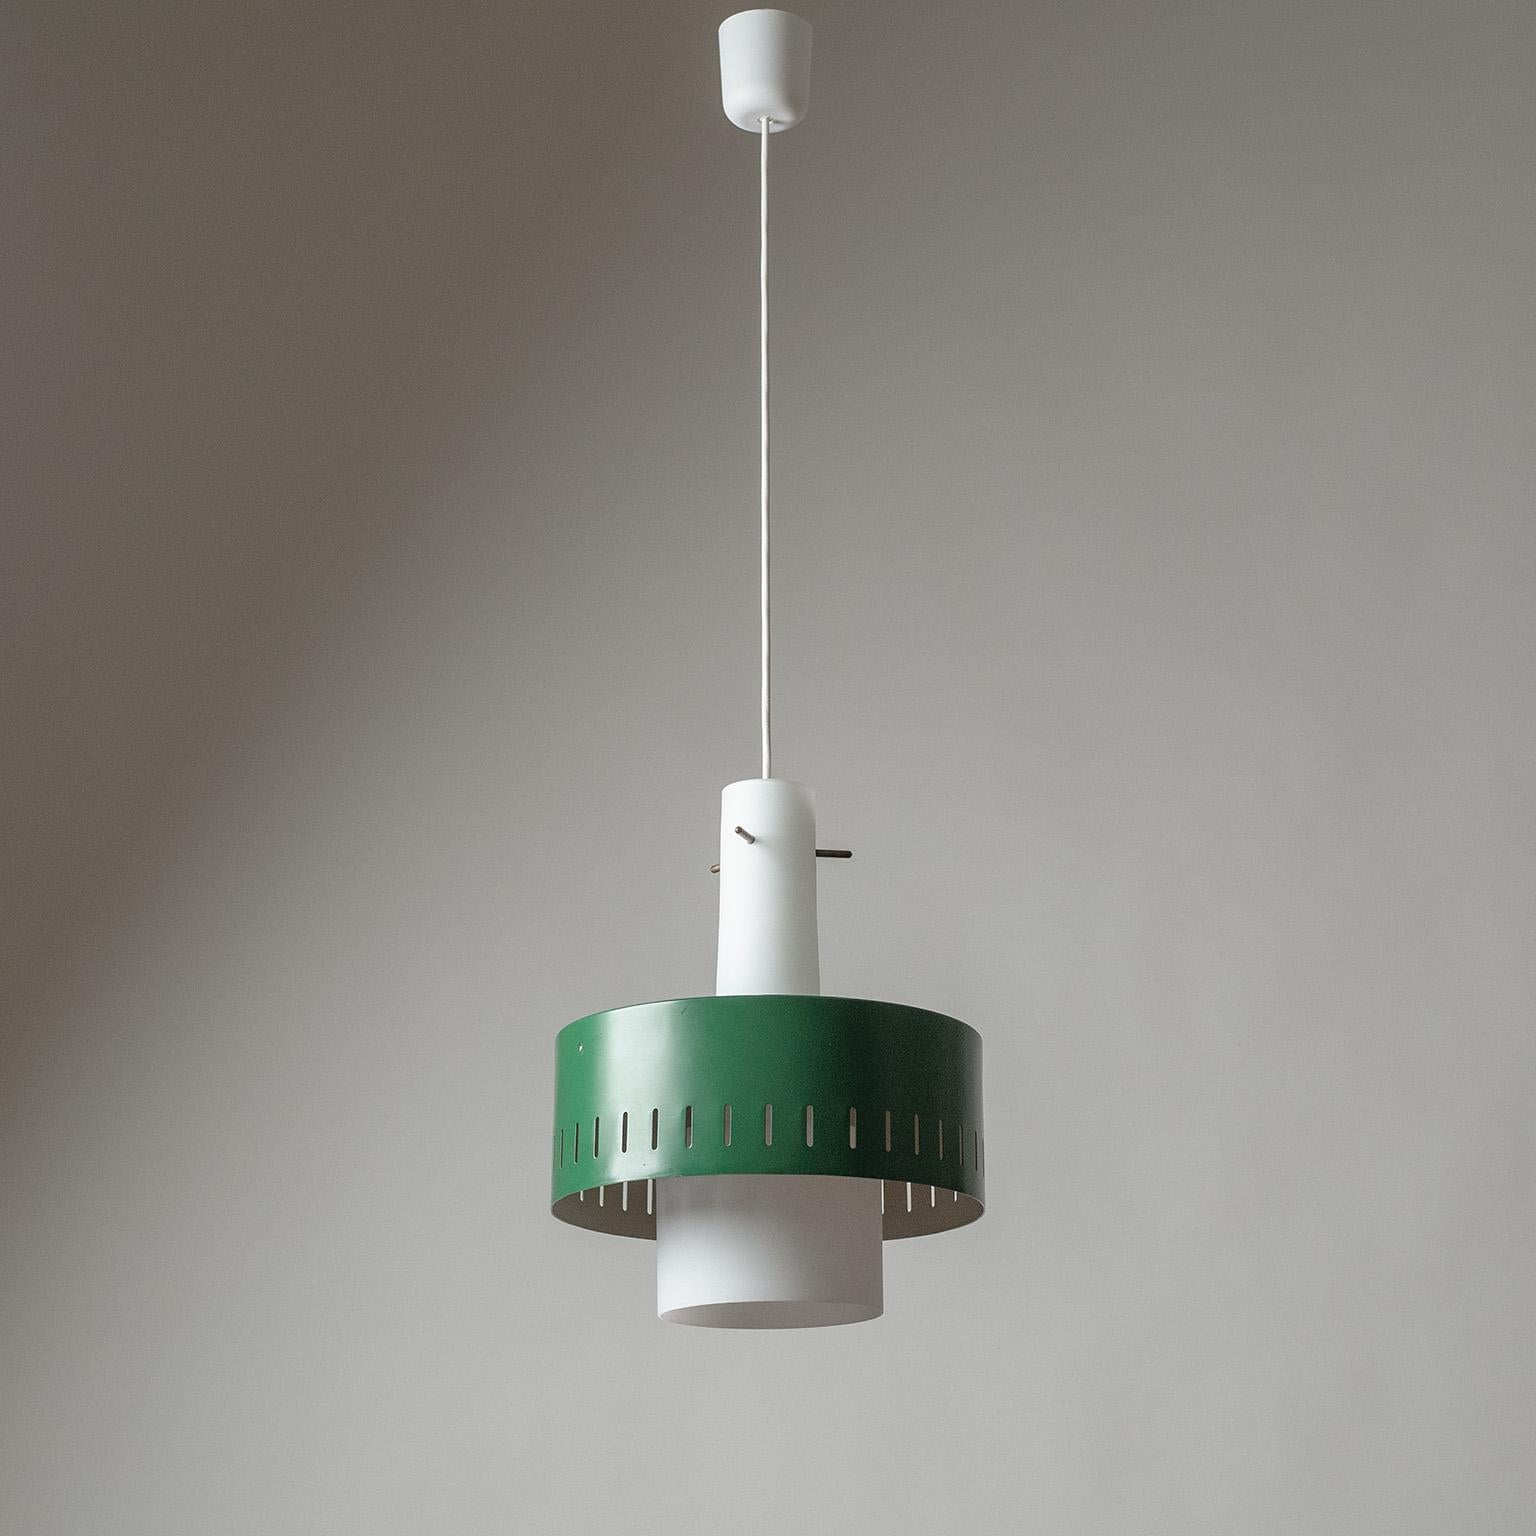 Classic Italian modernist pendant from the 1950-1960s. A satin glass diffuser with a green-lacquered and pierced aluminum shade is held by three brass stems. One original brass and ceramic E27 socket with new wiring. Body height is 33cm/13